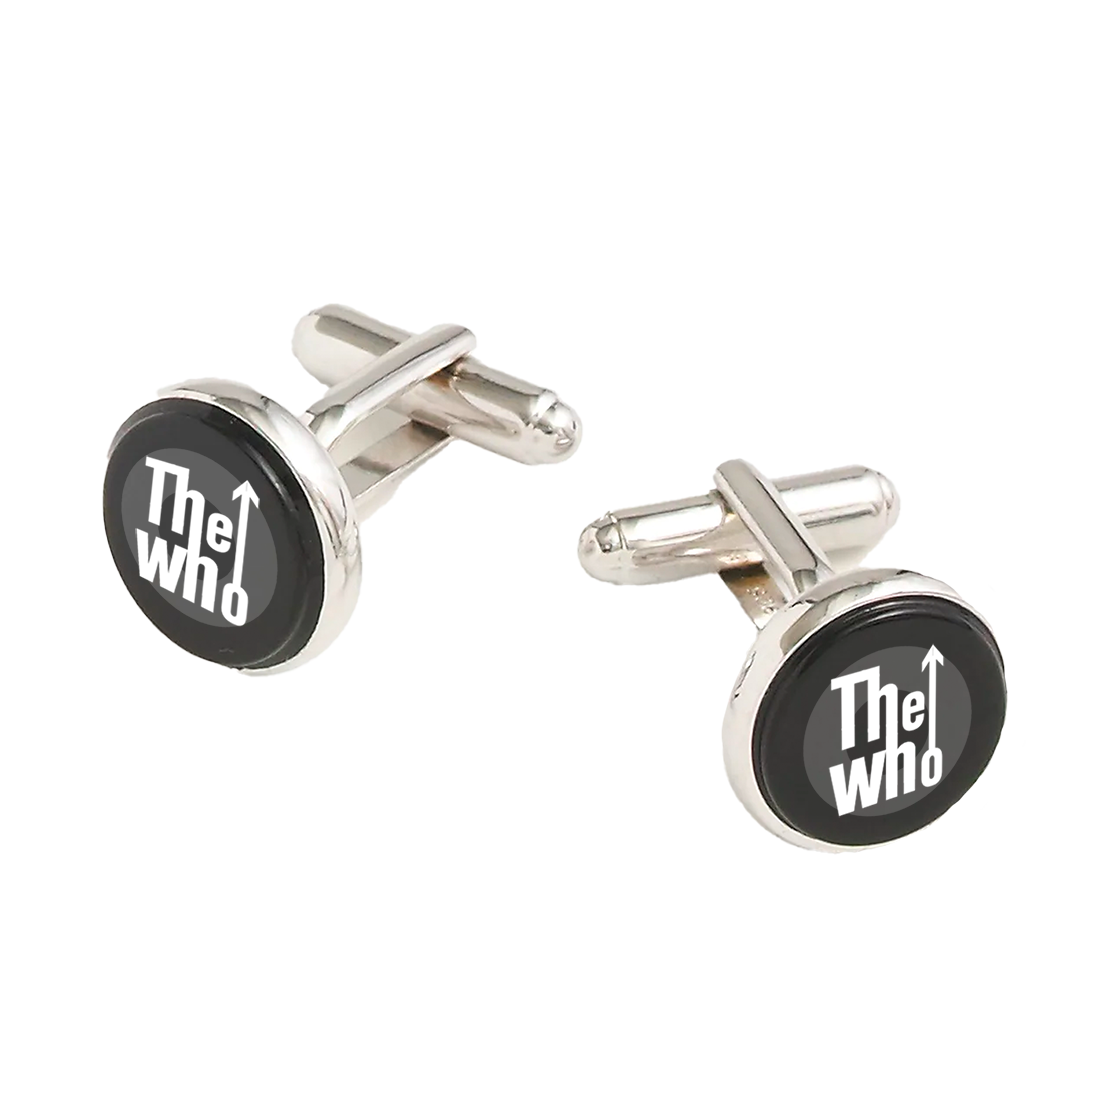 The Who - The Who Target Logo Cufflinks